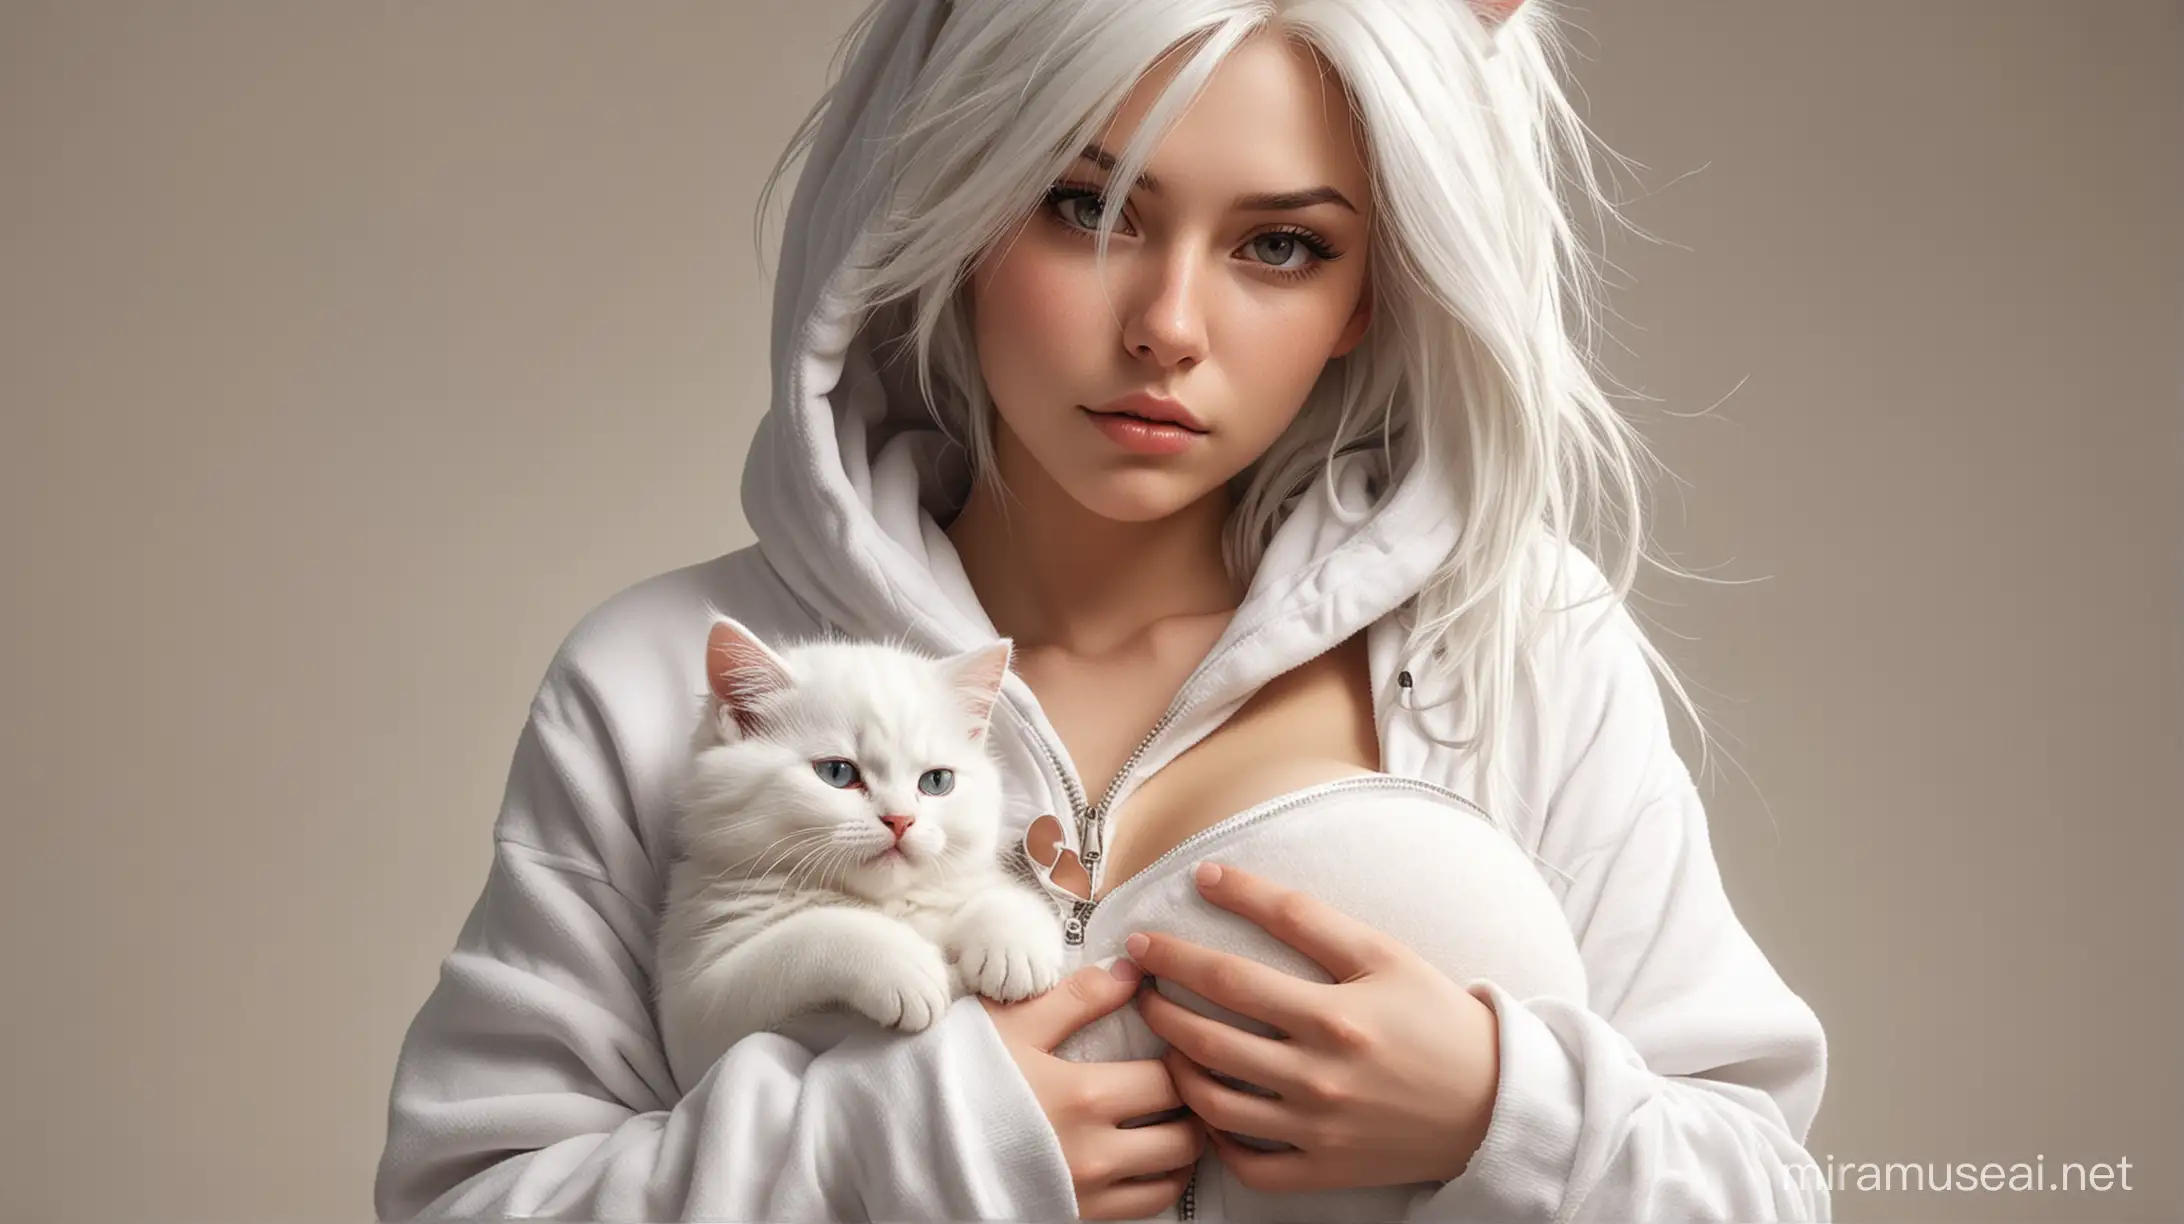 An extremely gigantic woman. She is a cat spirit. She is extremely cute, sexy, seductive, beautiful, and muscular. She has white cat-like hair which are long and wispy. She is wearing a cute cat hoodie. She is hiding a small kitten between her breasts under the zipper. she has a messy hairstyle. extremely large breasts; very big cleavage;